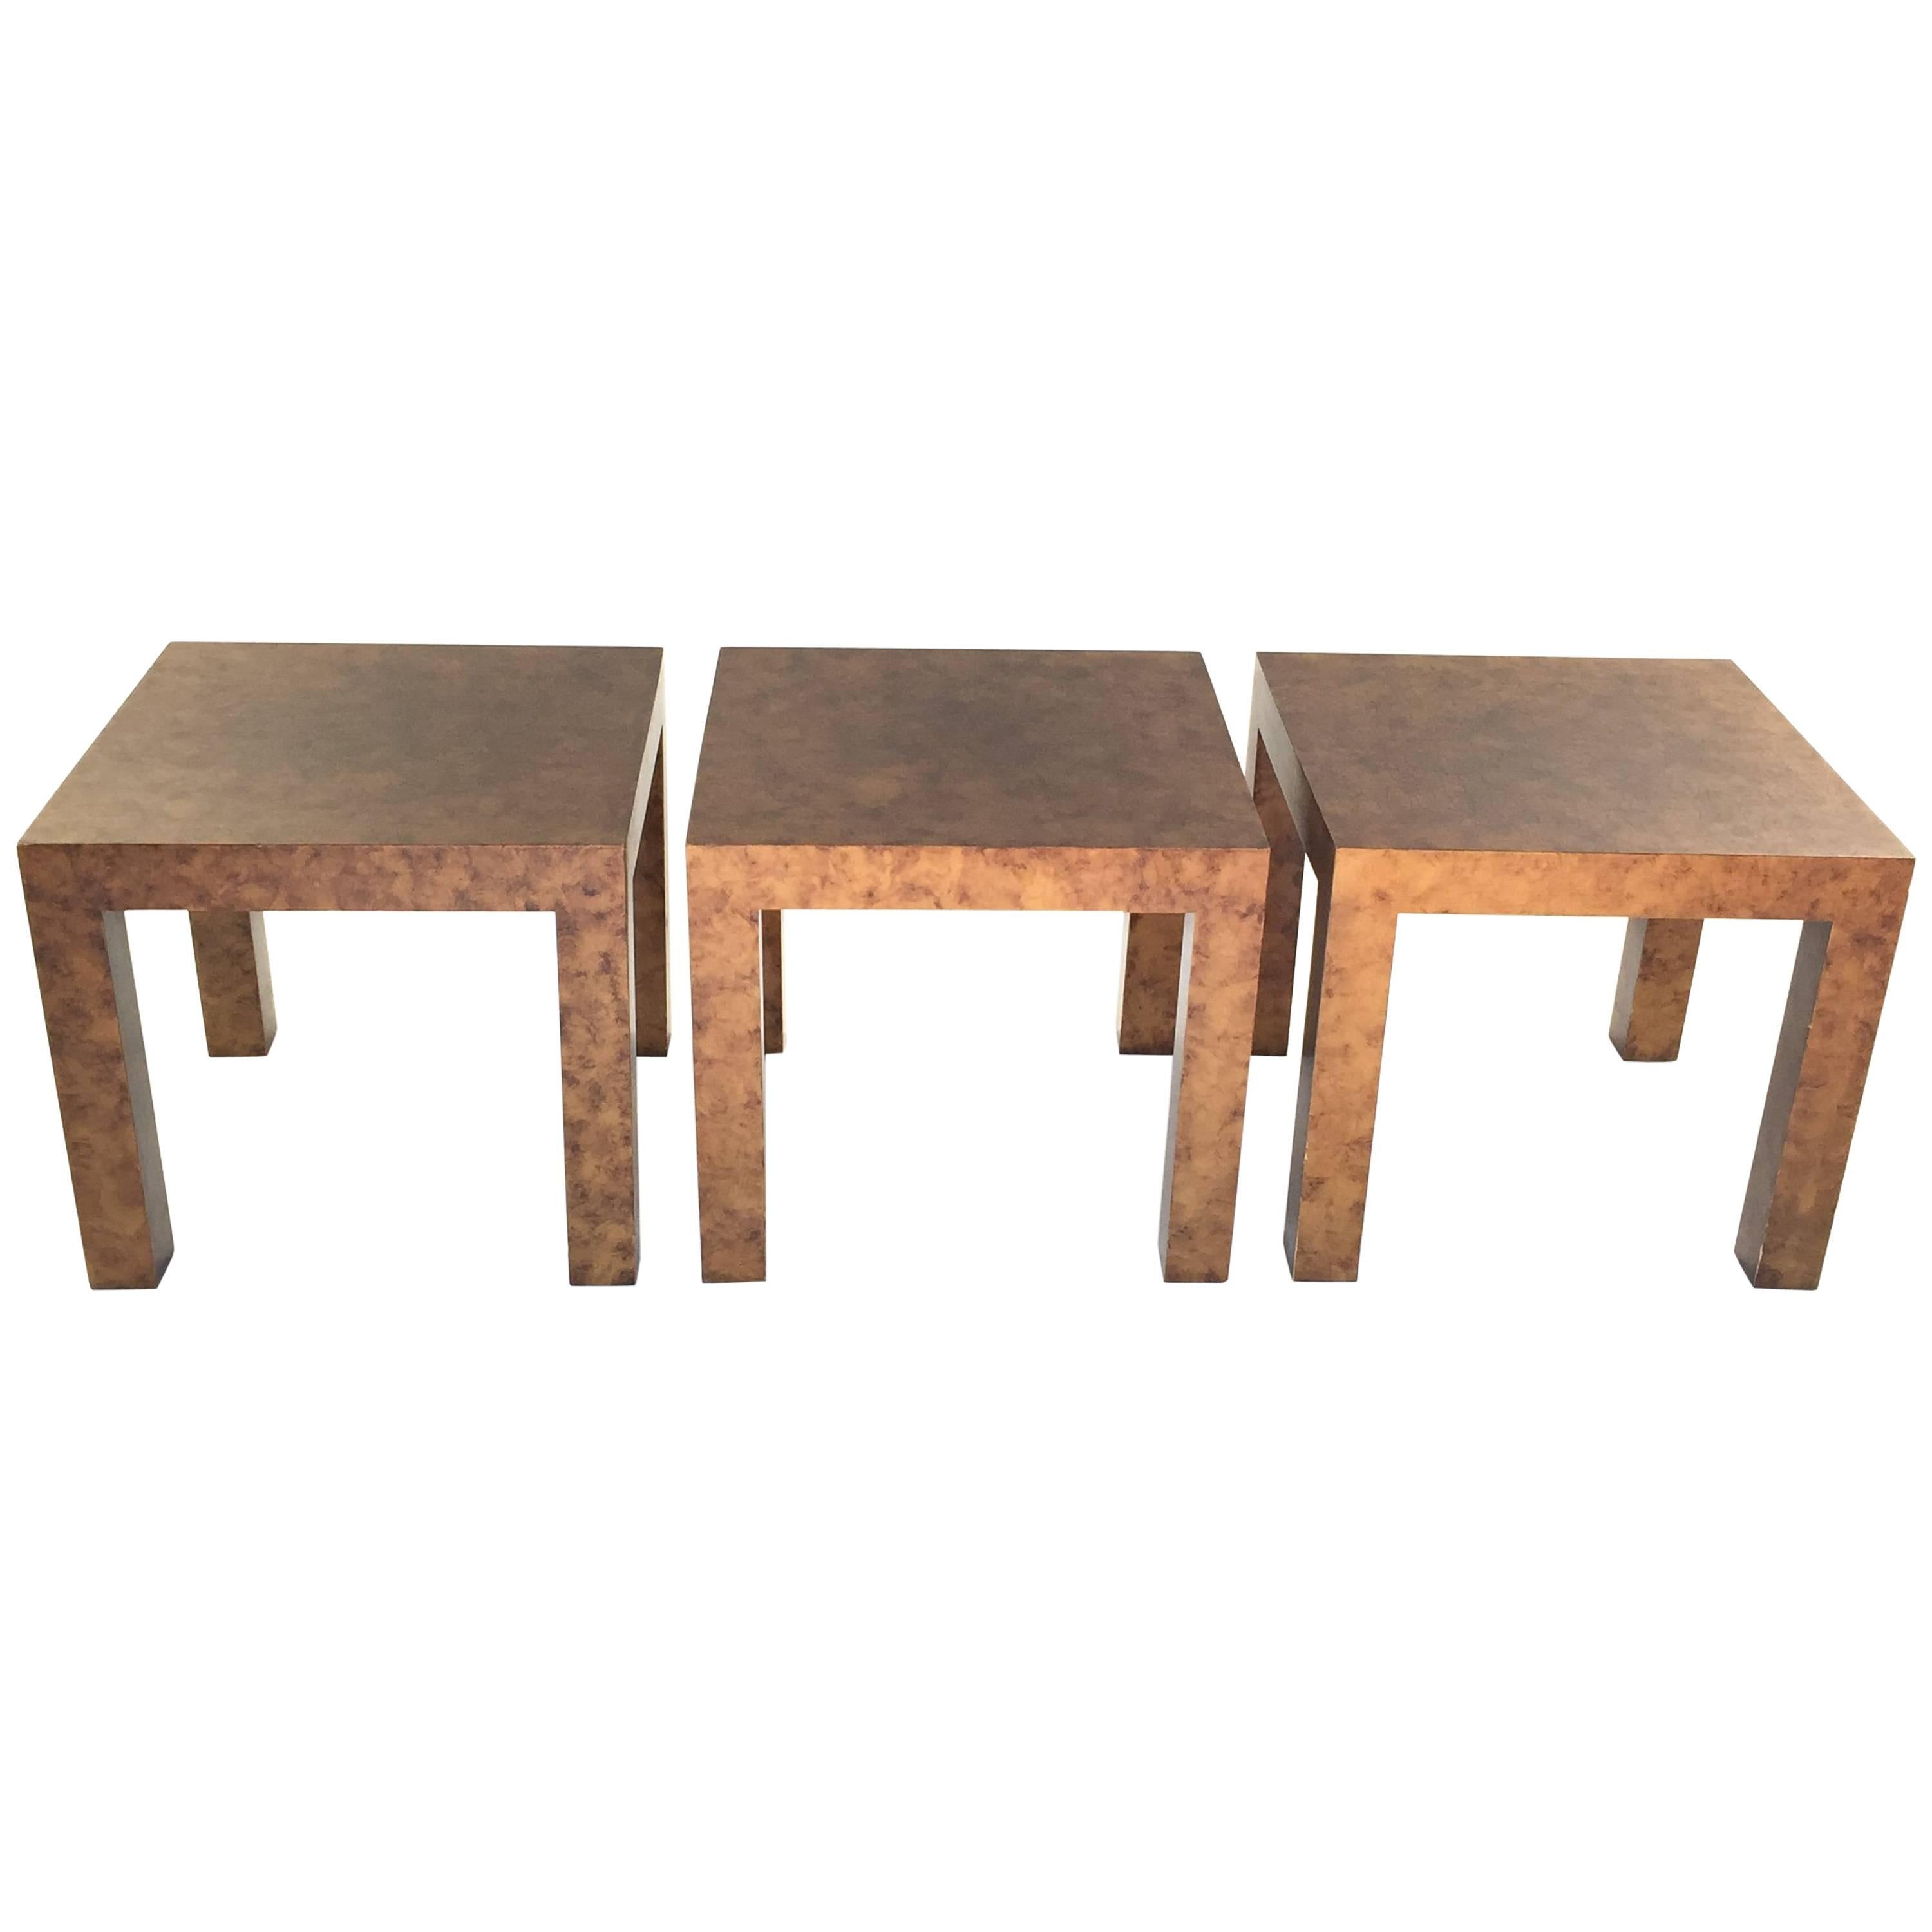 Trio of Burl Wood End Tables by Milo Baughman for Thayer Coggin For Sale